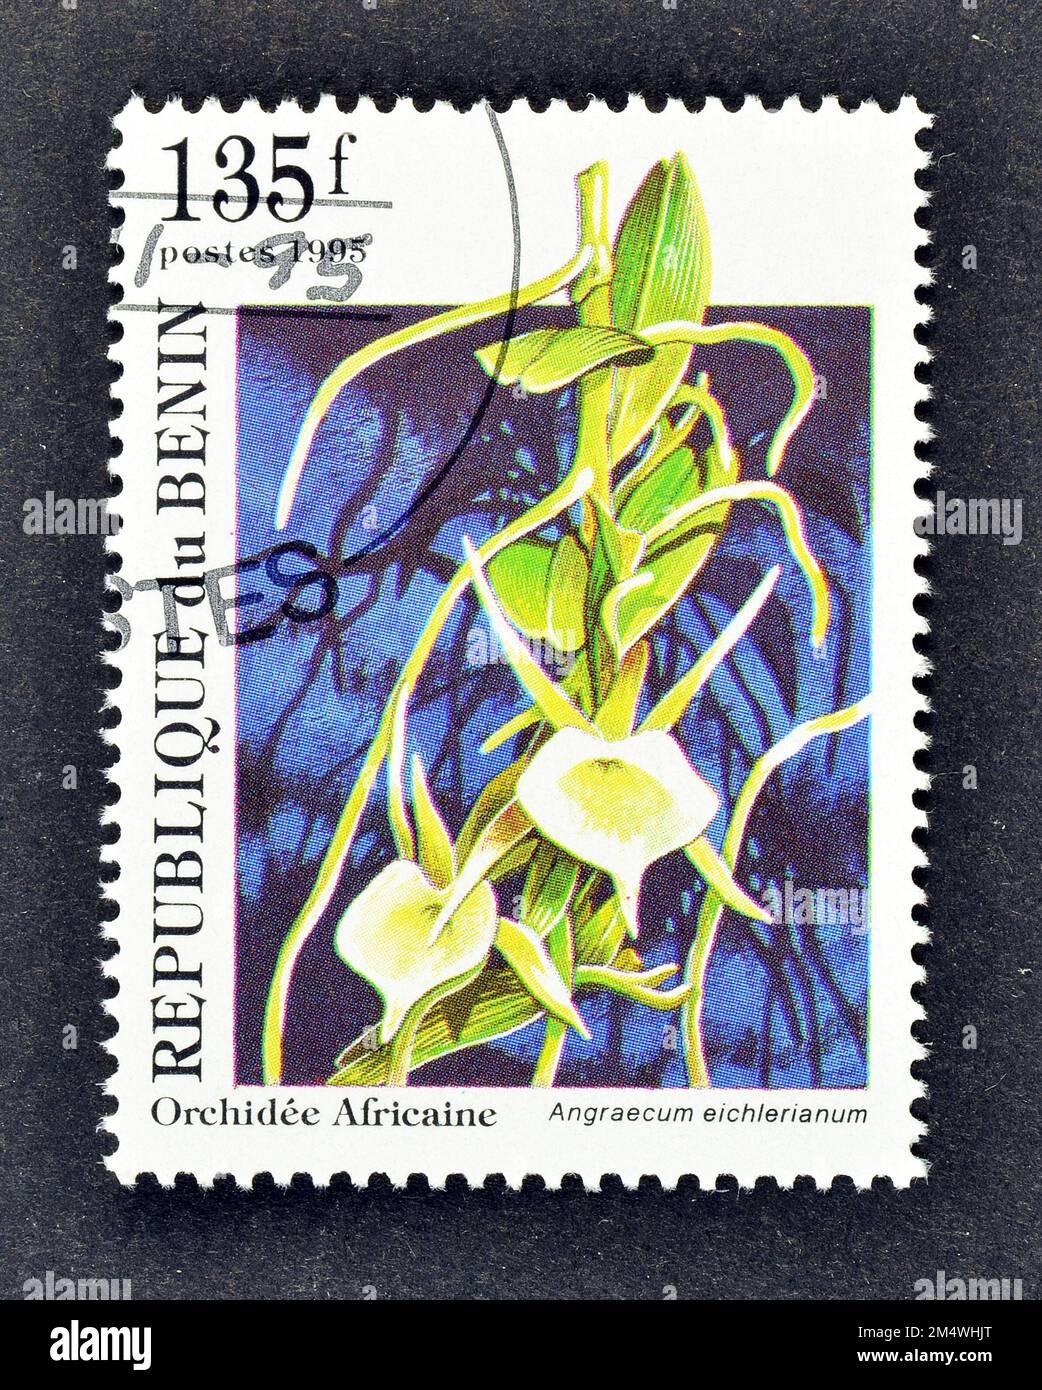 Cancelled postage stamp printed by Benin, that shows Angraecum eichlerianum  orchid, circa 1995. Stock Photo